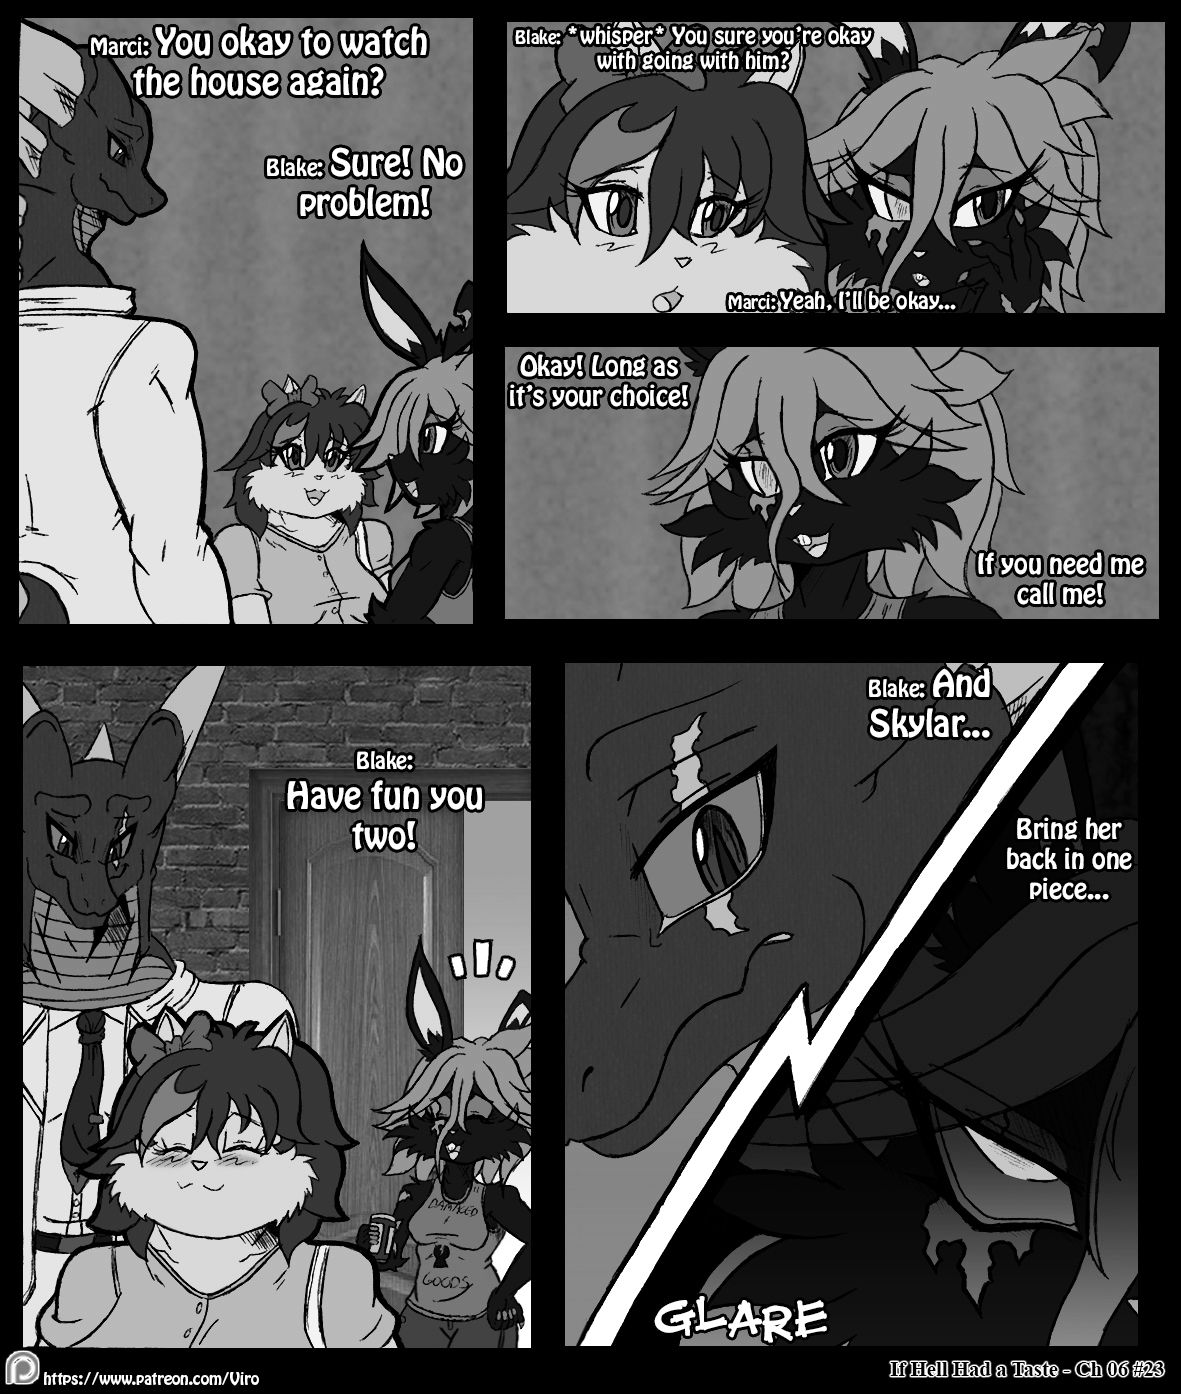 [Viro] If Hell Had a Taste Chapter 6 [Ongoing] 24